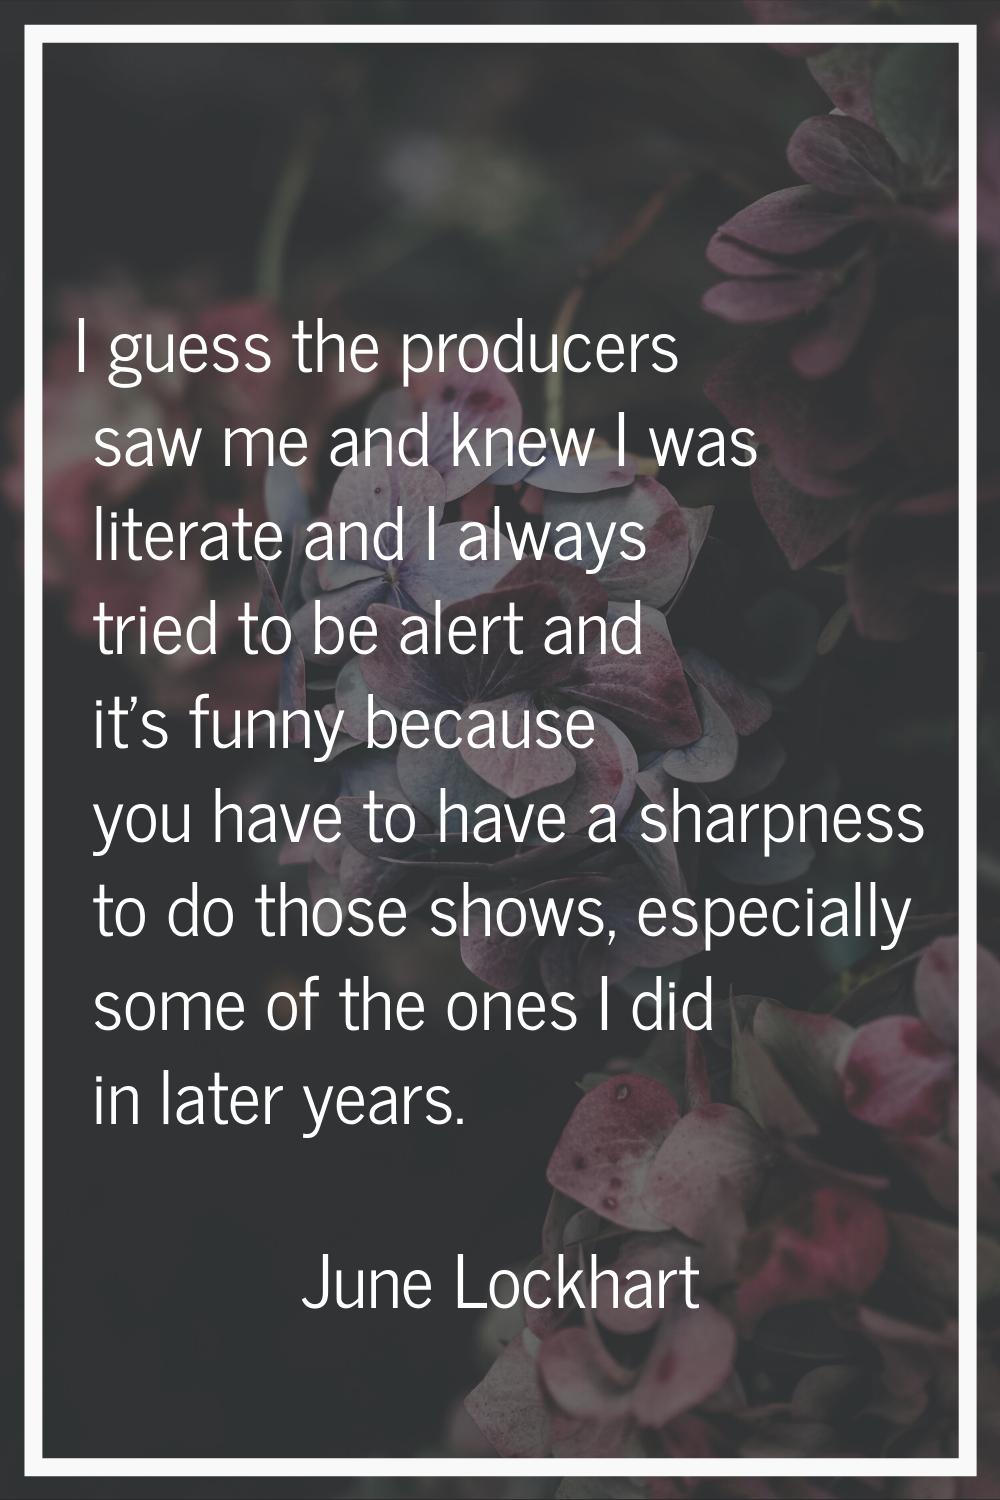 I guess the producers saw me and knew I was literate and I always tried to be alert and it's funny 